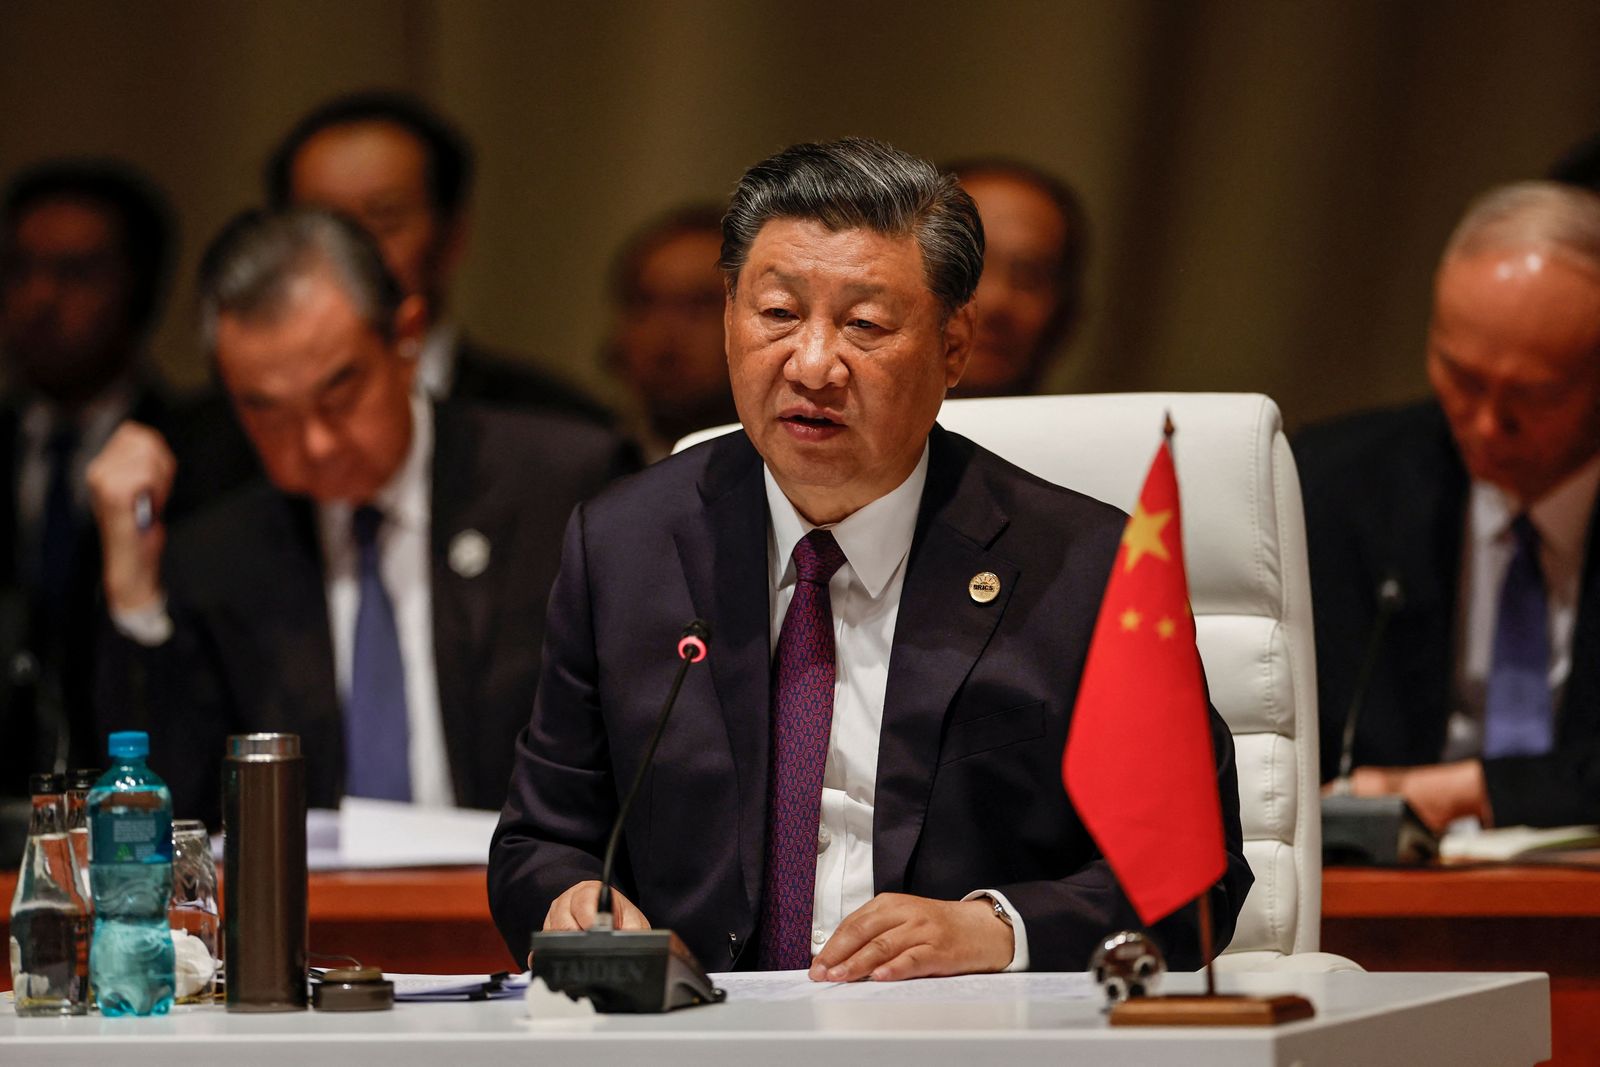 President of China Xi Jinping attends the plenary session during the 2023 BRICS Summit at the Sandton Convention Centre in Johannesburg on August 23, 2023. (Photo by GIANLUIGI GUERCIA / POOL / AFP) - AFP